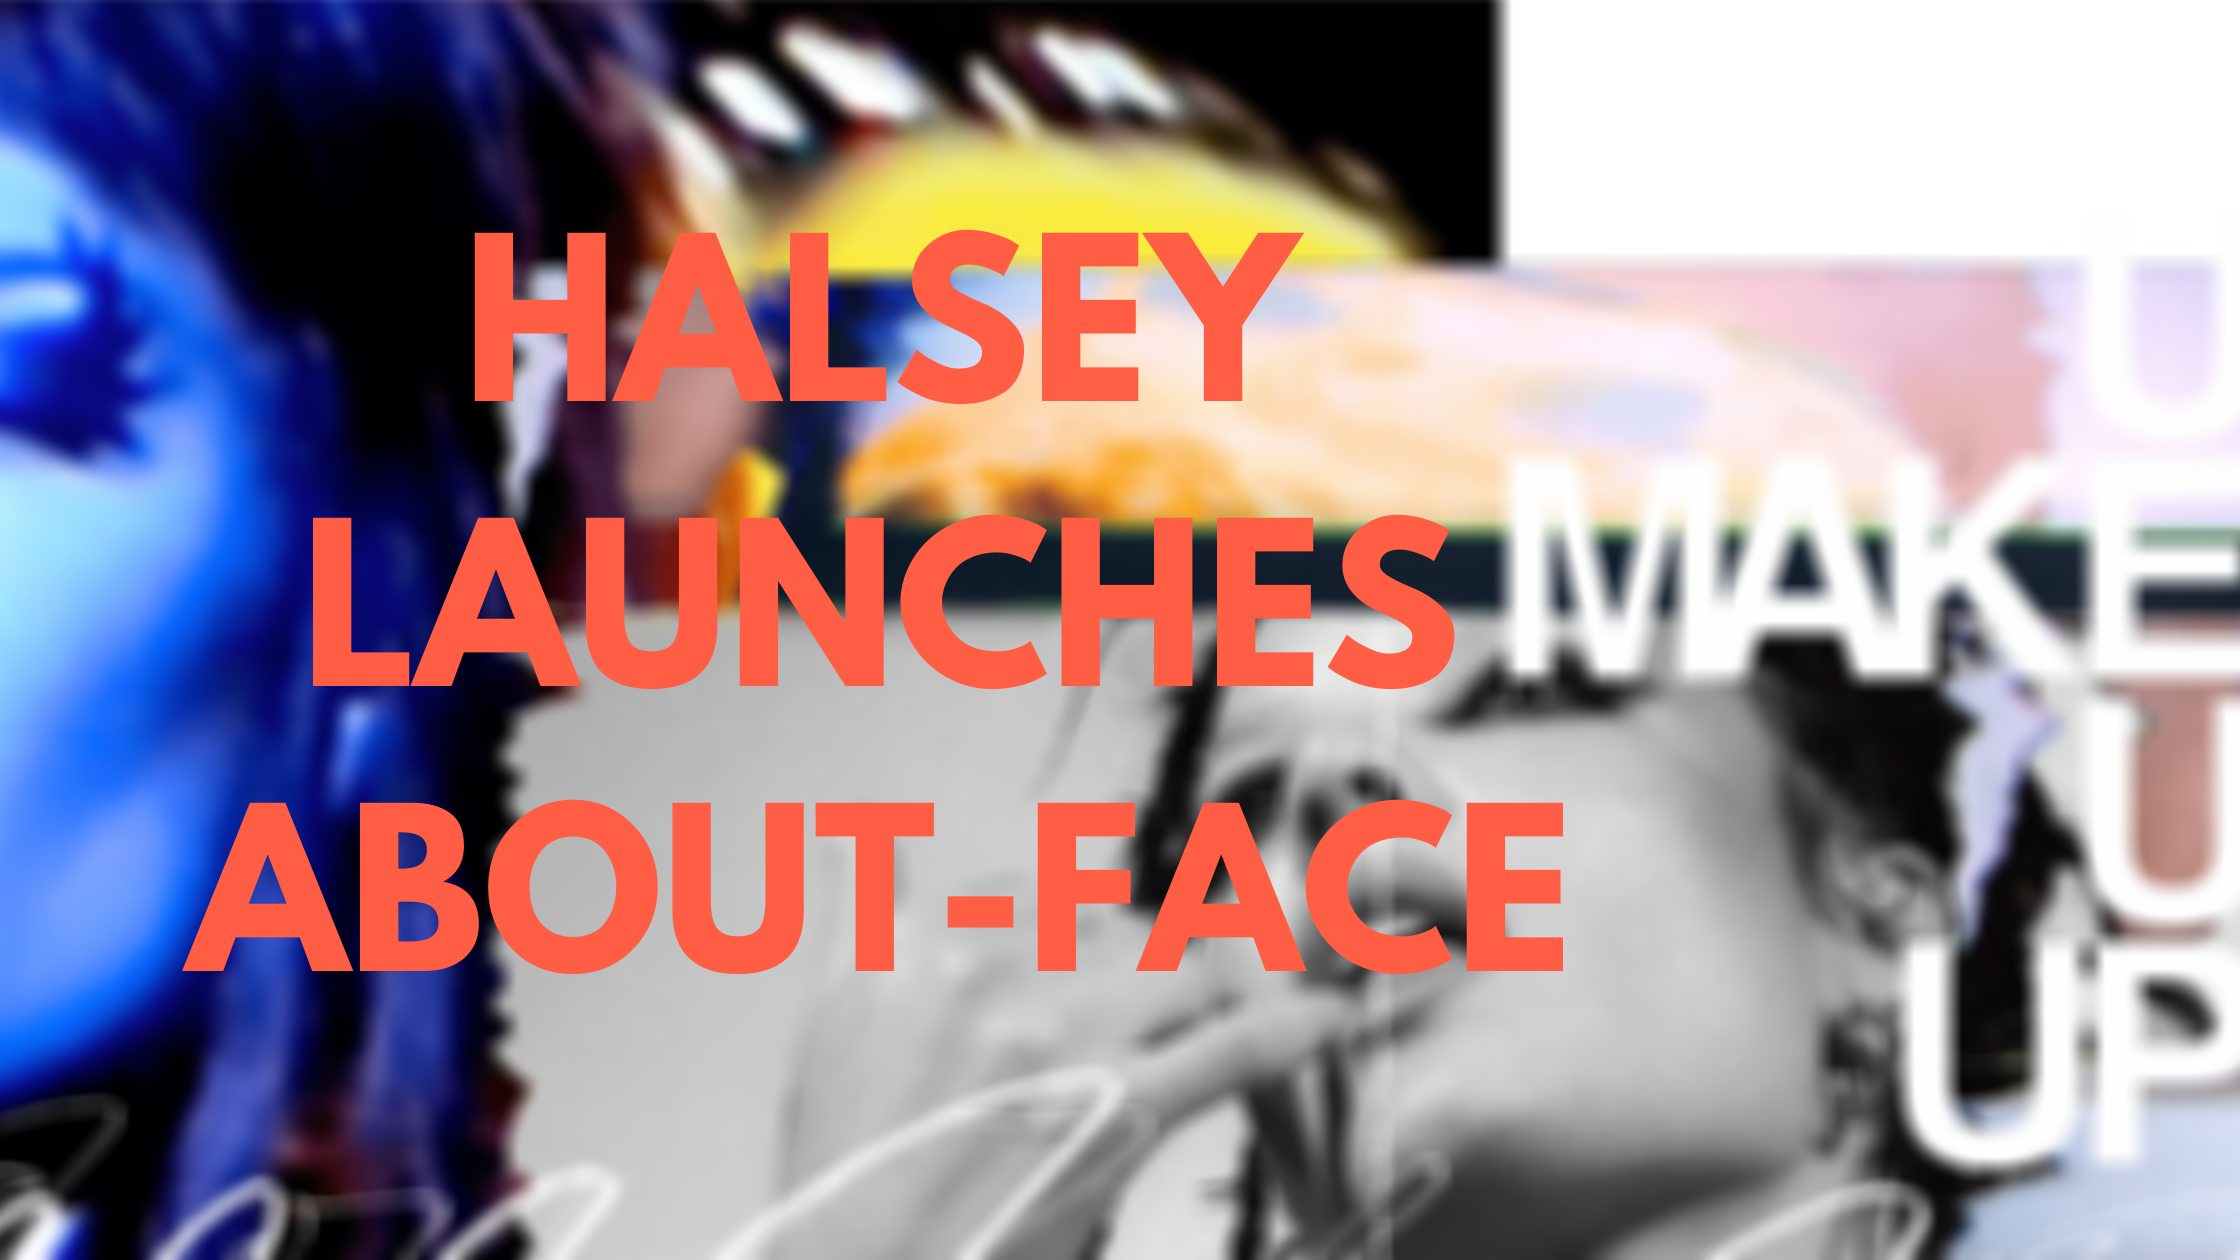 Halsey to launch makeup line, About-Face, on January 25